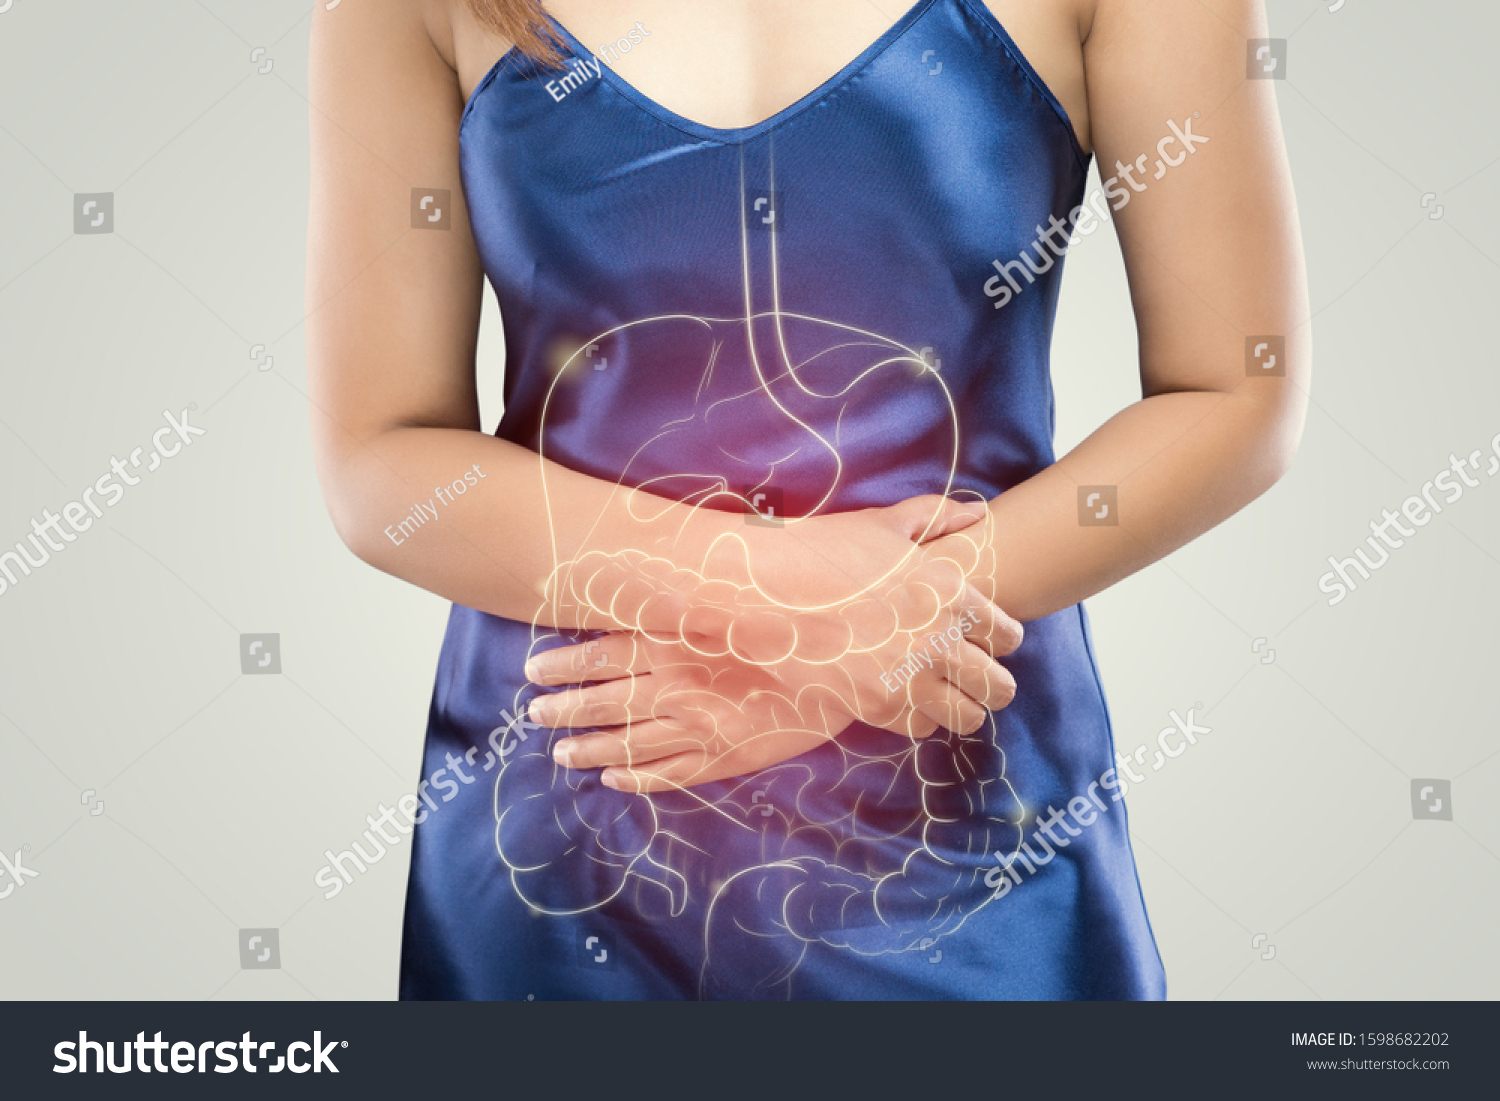 The photo of internal organs is on the woman's body against gray background, People With Stomach ache problem concept, Female anatomy #1598682202